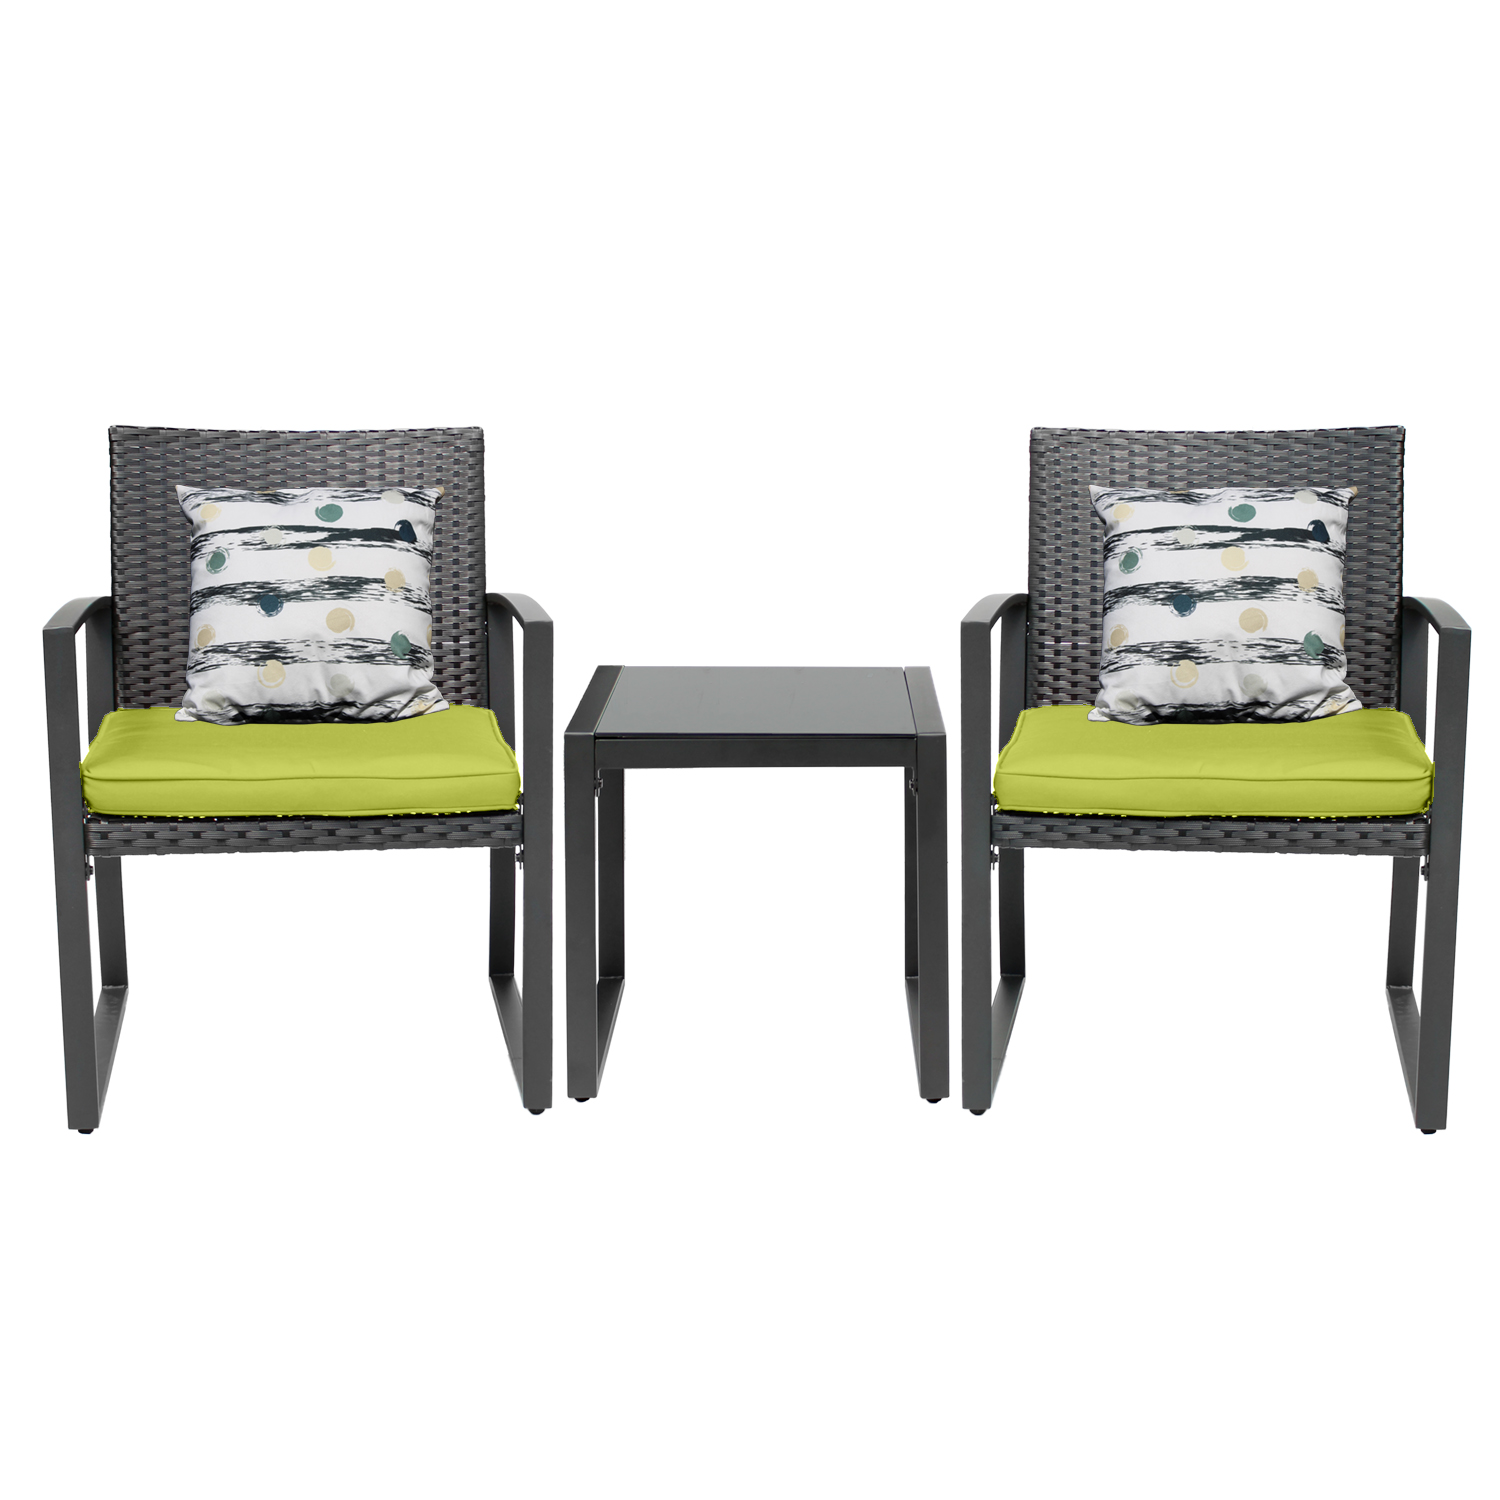 Outdoor 3-Piece Dialog Bistro Set Black Wicker Furniture-Two Chairs with Glass Coffee Table Green - image 2 of 7